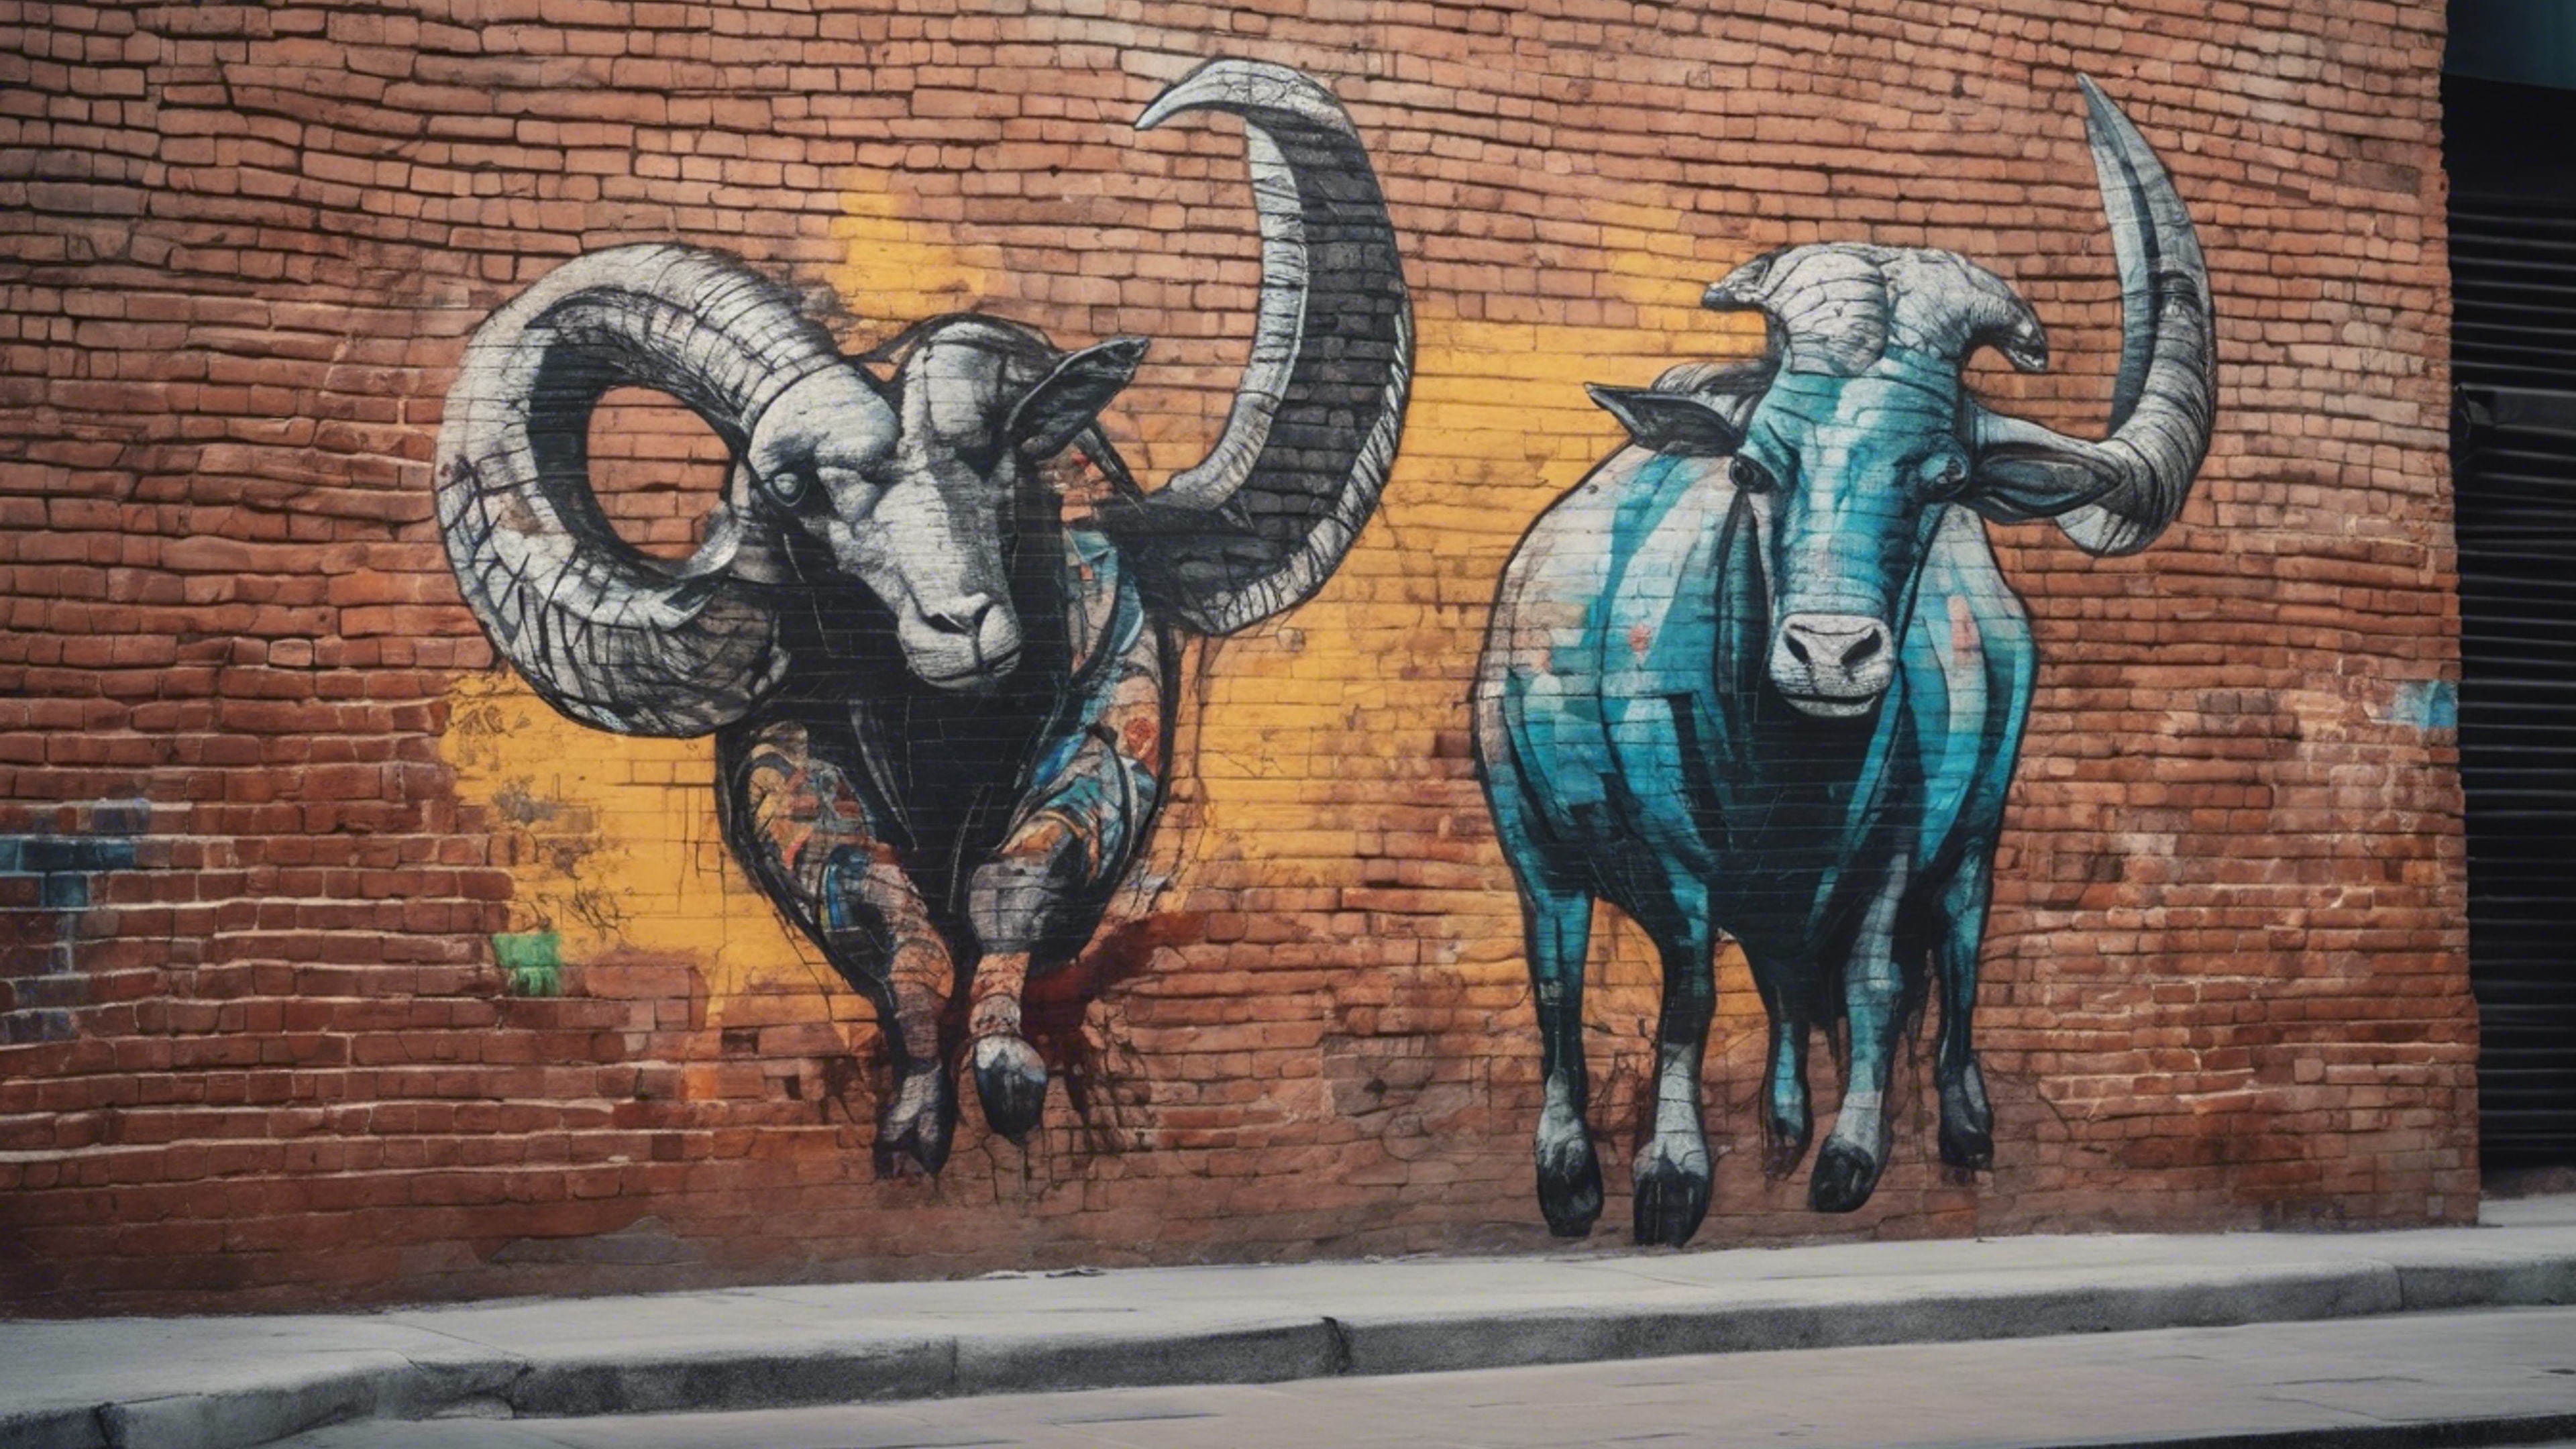 A Capricorn painted as street art on a brick wall in a busy city street. کاغذ دیواری[8124c45194ee4830b5c7]